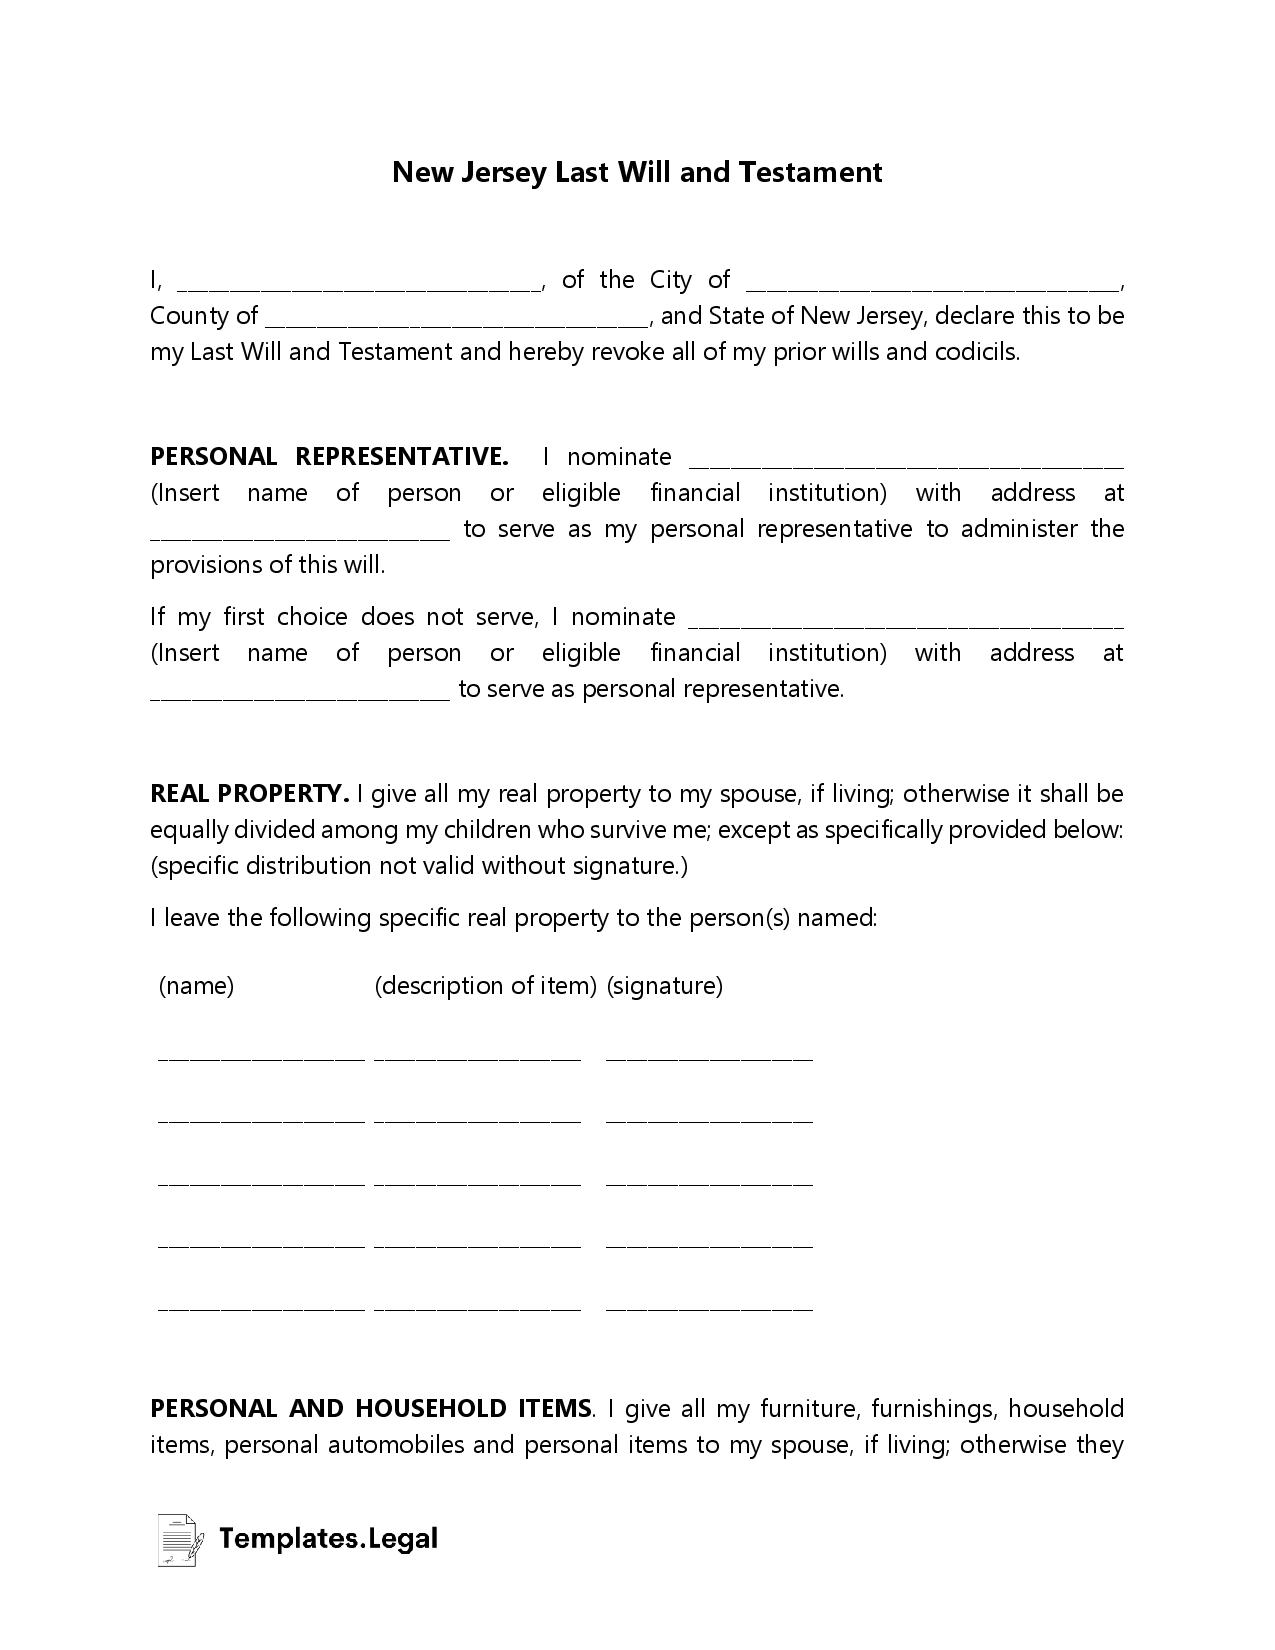 New Jersey Last Will and Testament - Templates.Legal